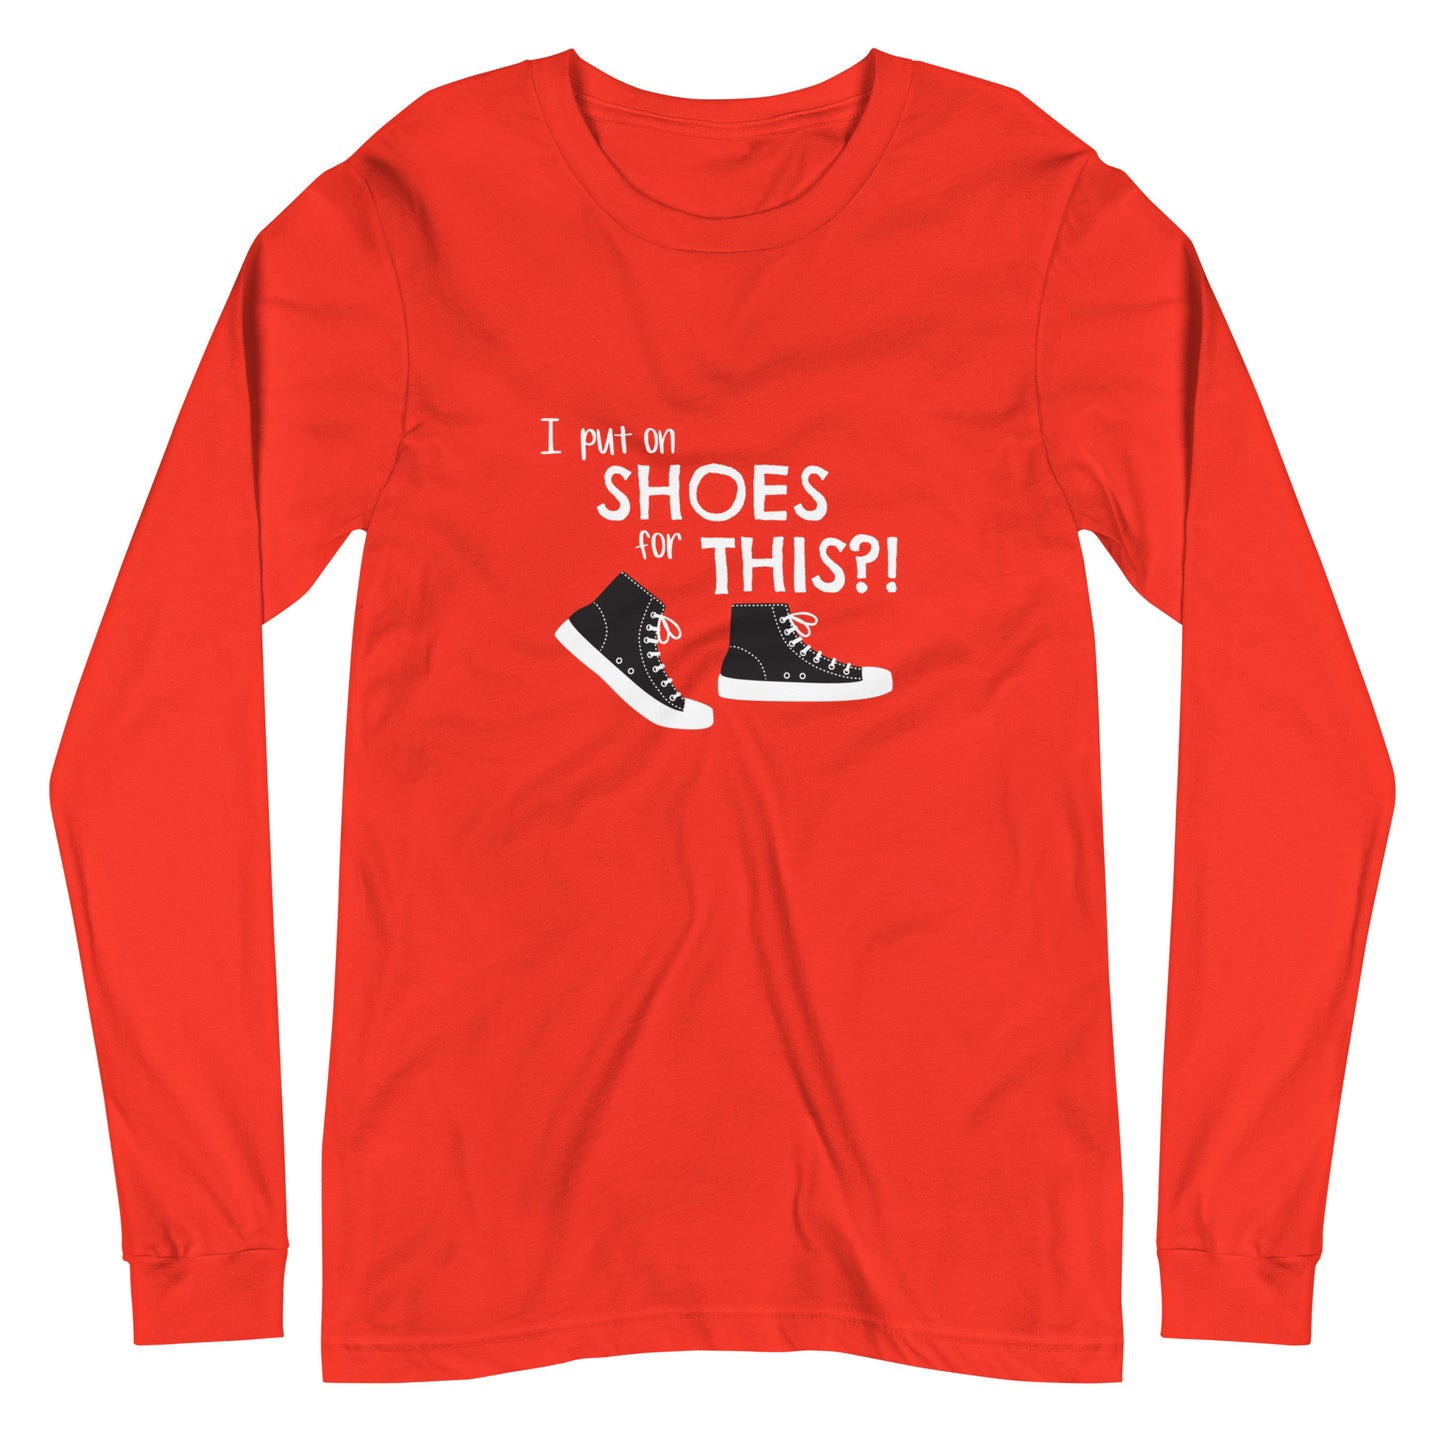 Poppy (bright red) long-sleeve t-shirt with graphic of black and white canvas "chuck" sneakers and text: "I put on SHOES for THIS?!"